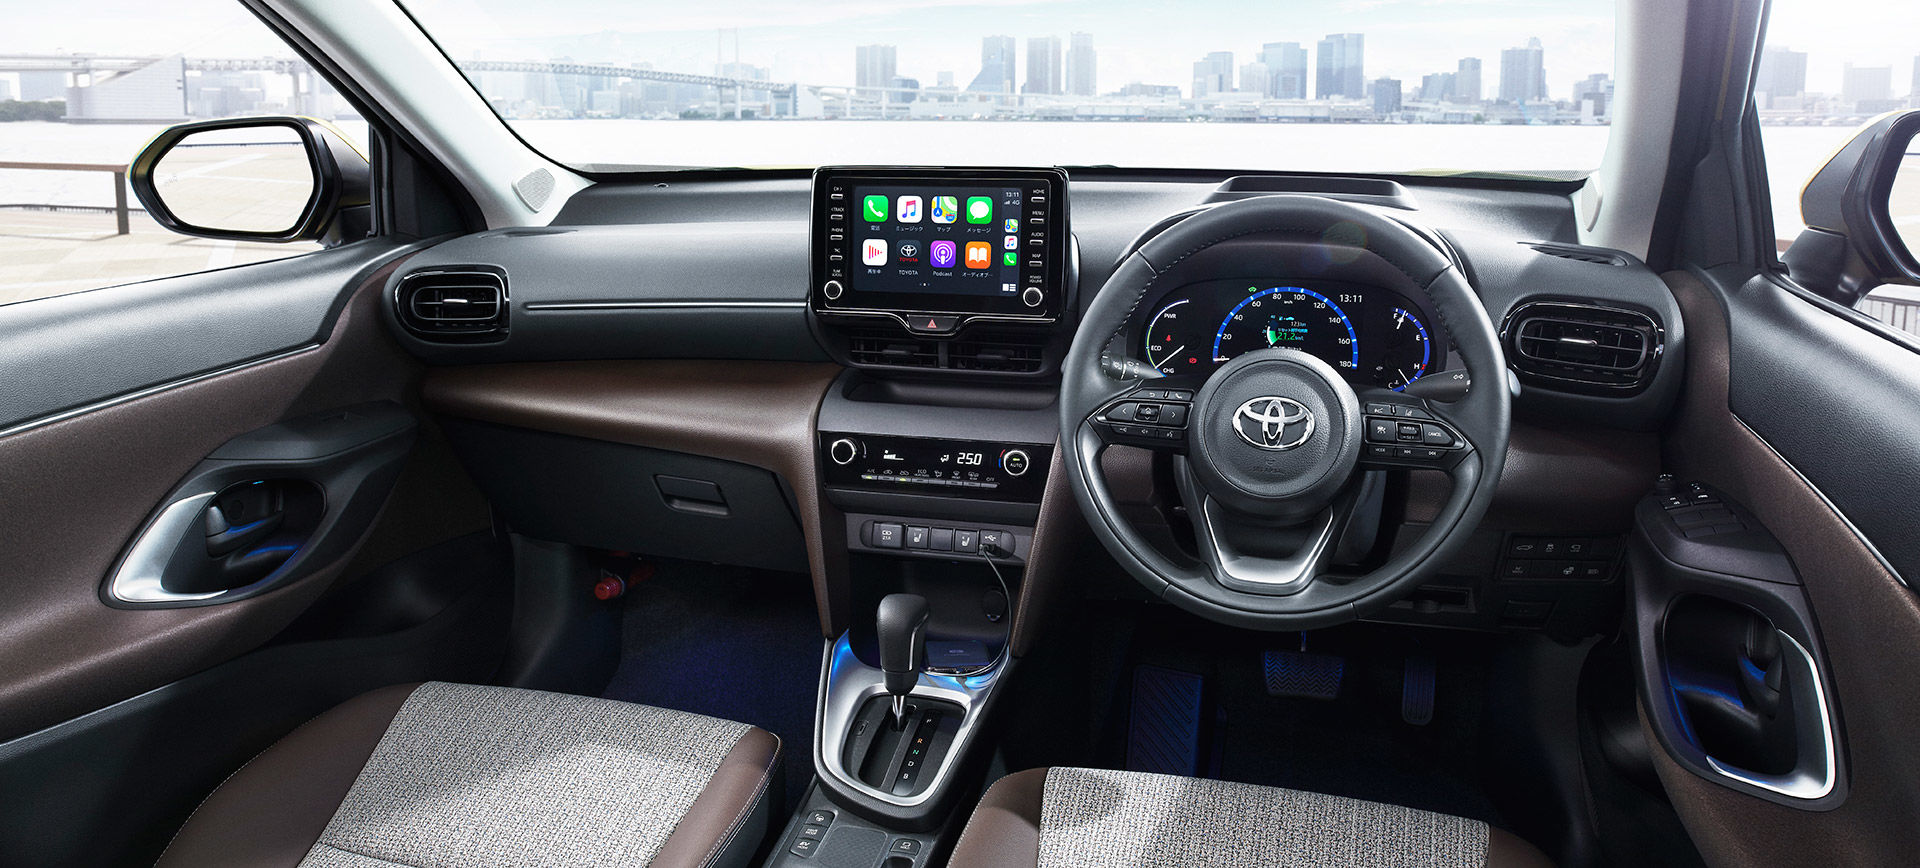 The Yaris Cross SUV cabin space has a sophisticated and comfortable feel.